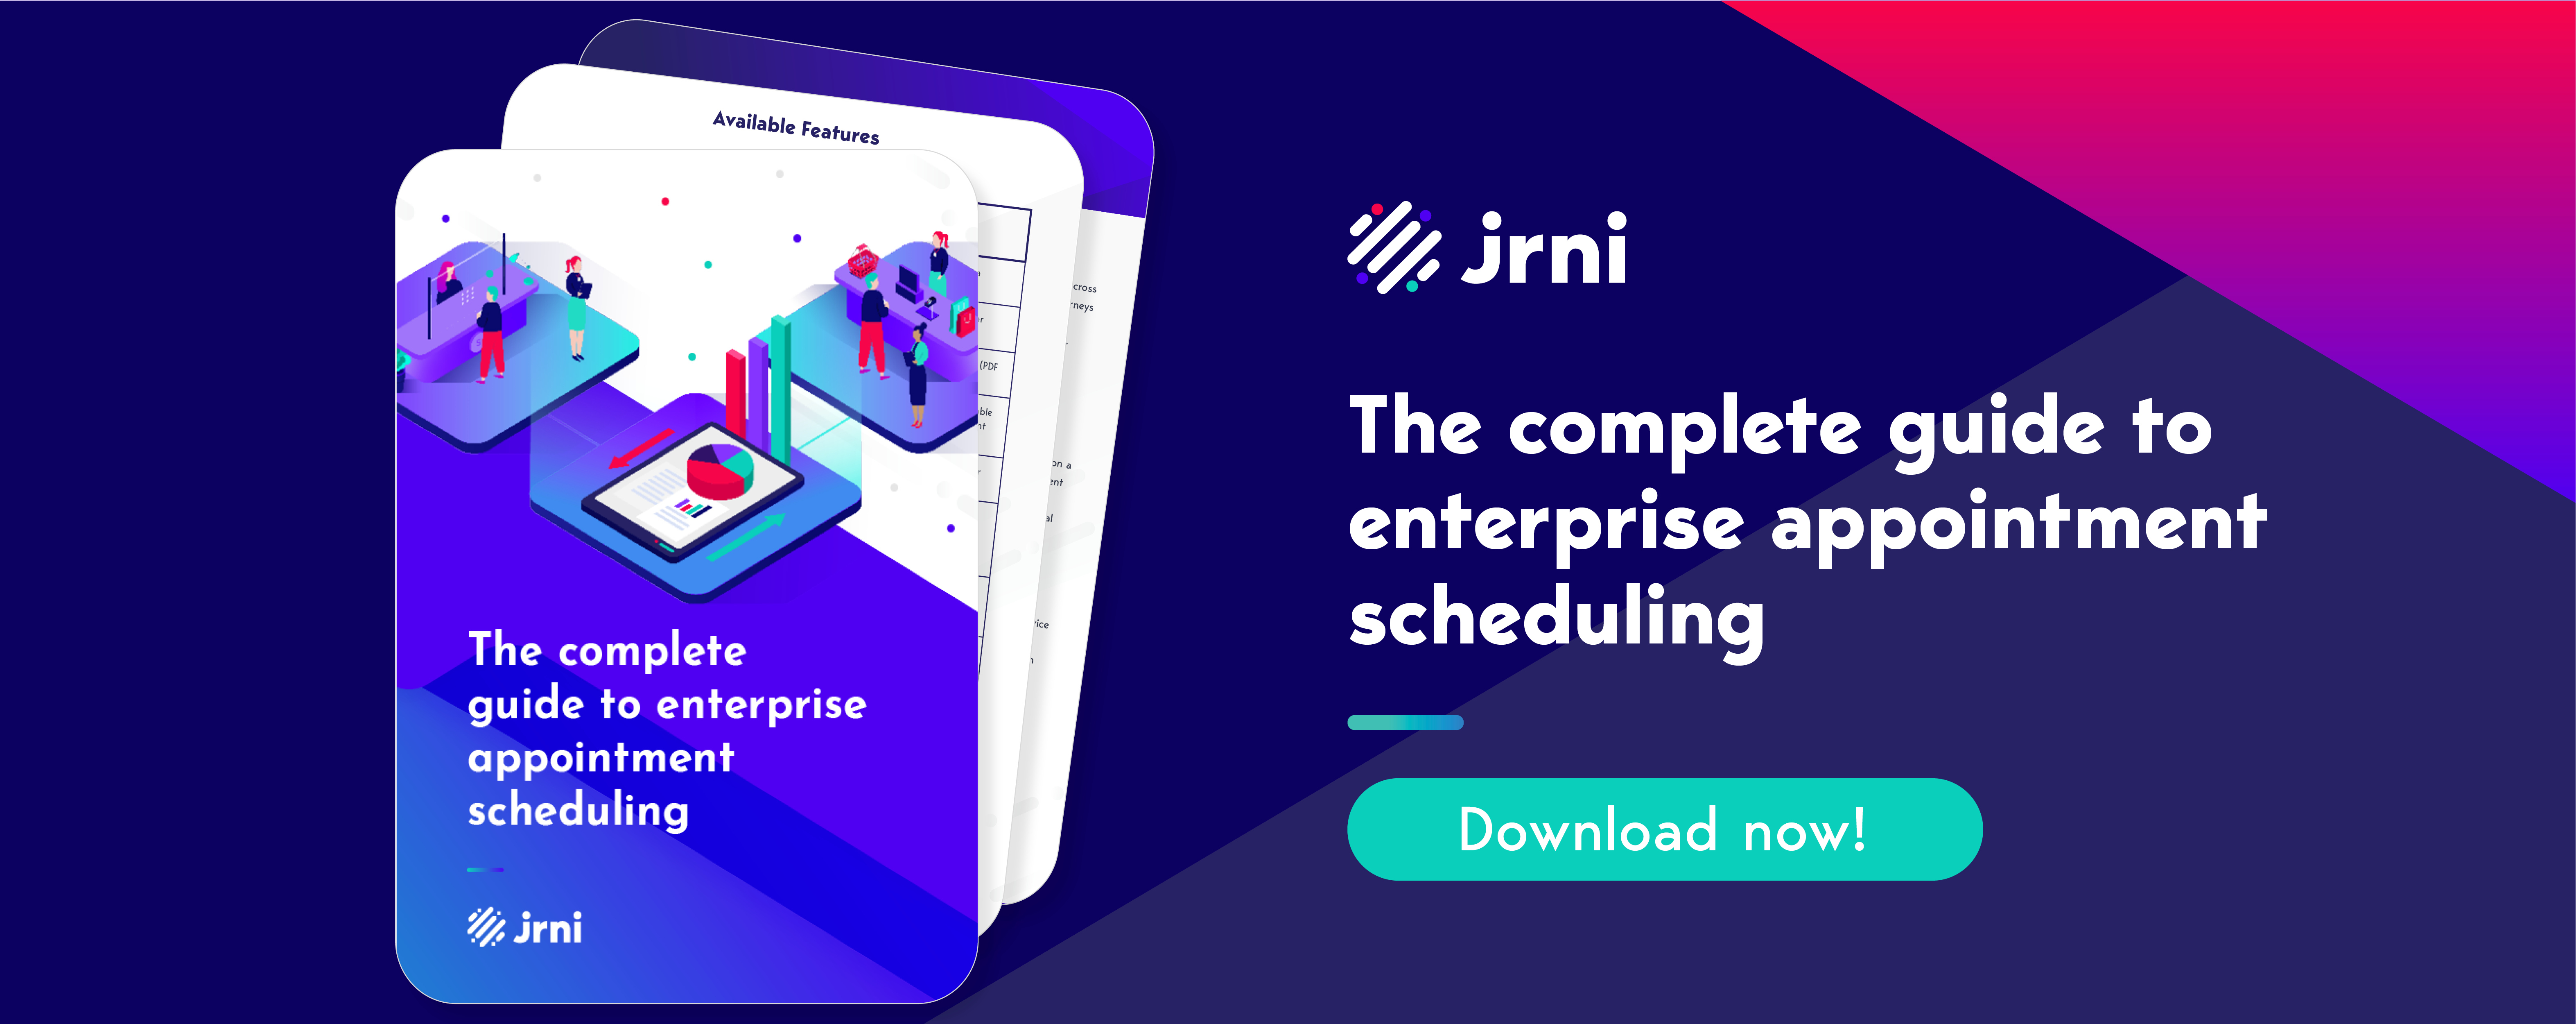 The complete guide to enterprise appointment scheduling: Get the guide!